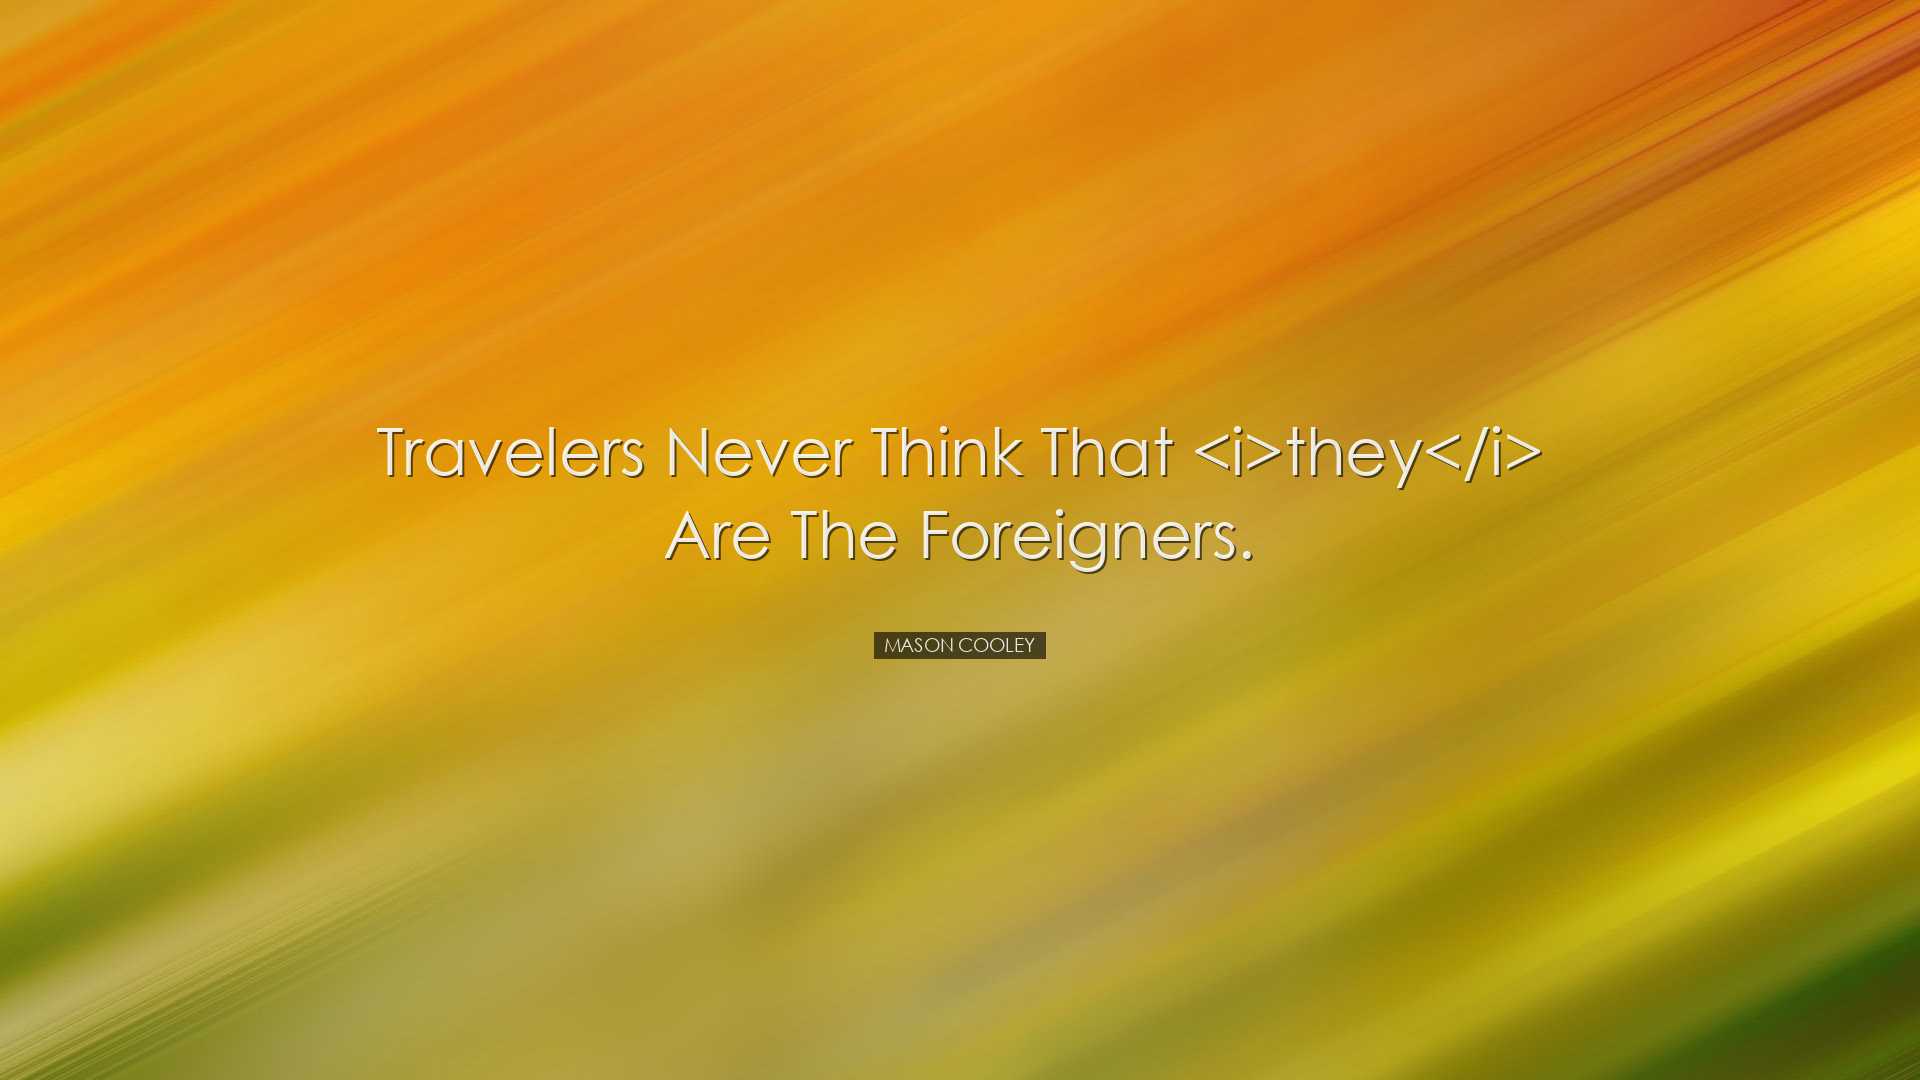 Travelers never think that they are the foreigners. - Mason